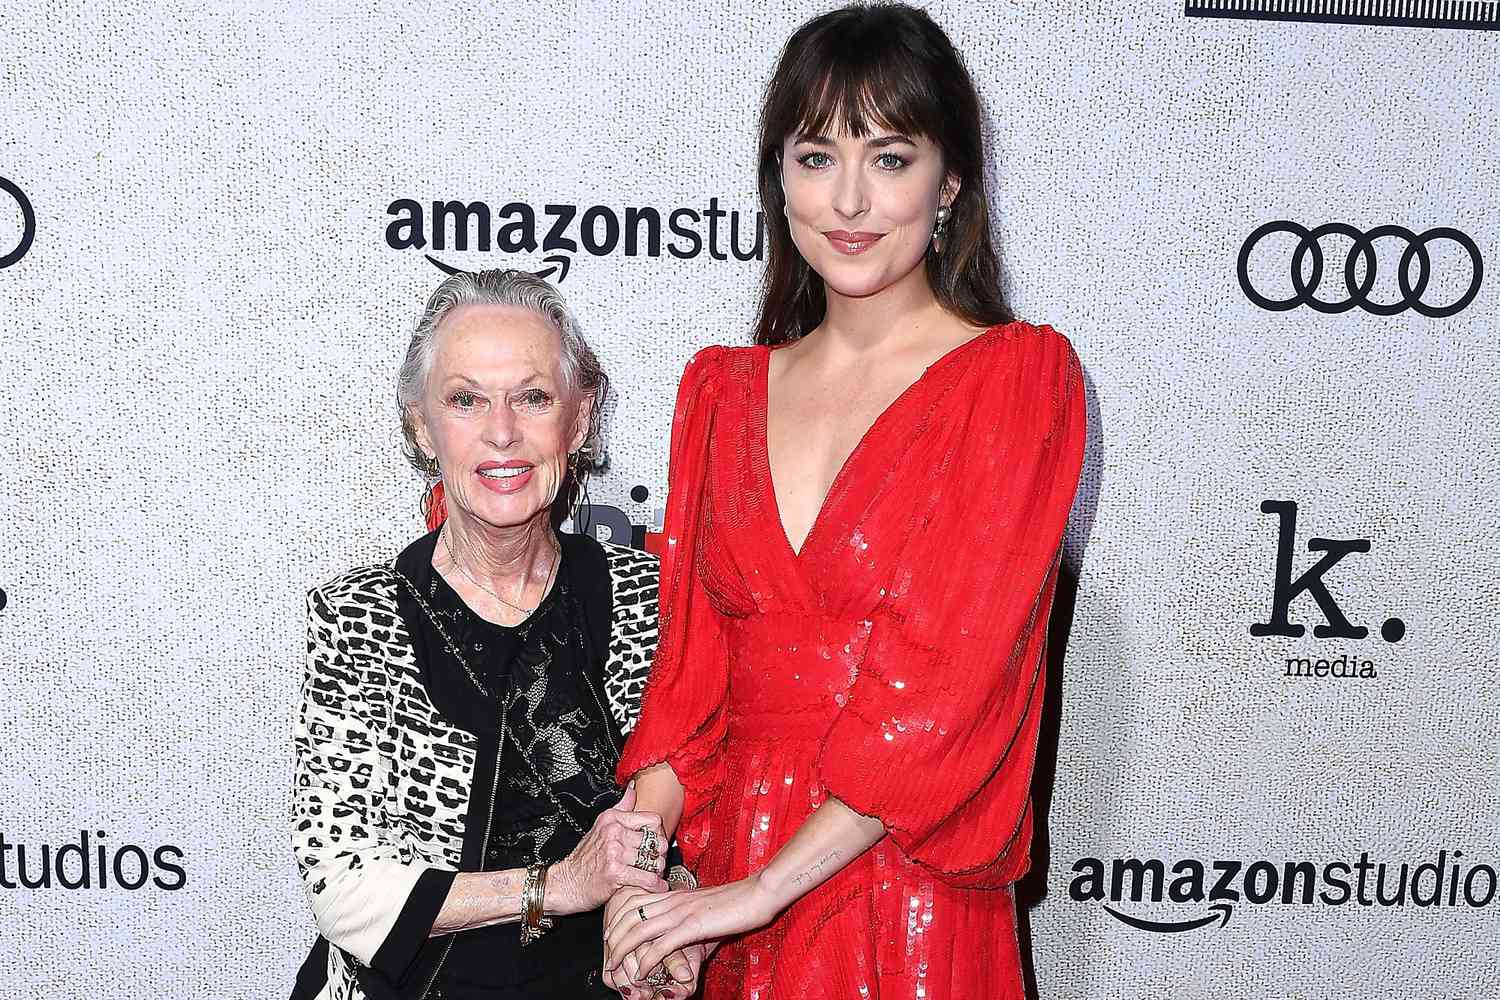 Dakota Johnson Says Her Family Should Have Been 'Warned' About 'Heartbreaking' Tippi Hedren Movie